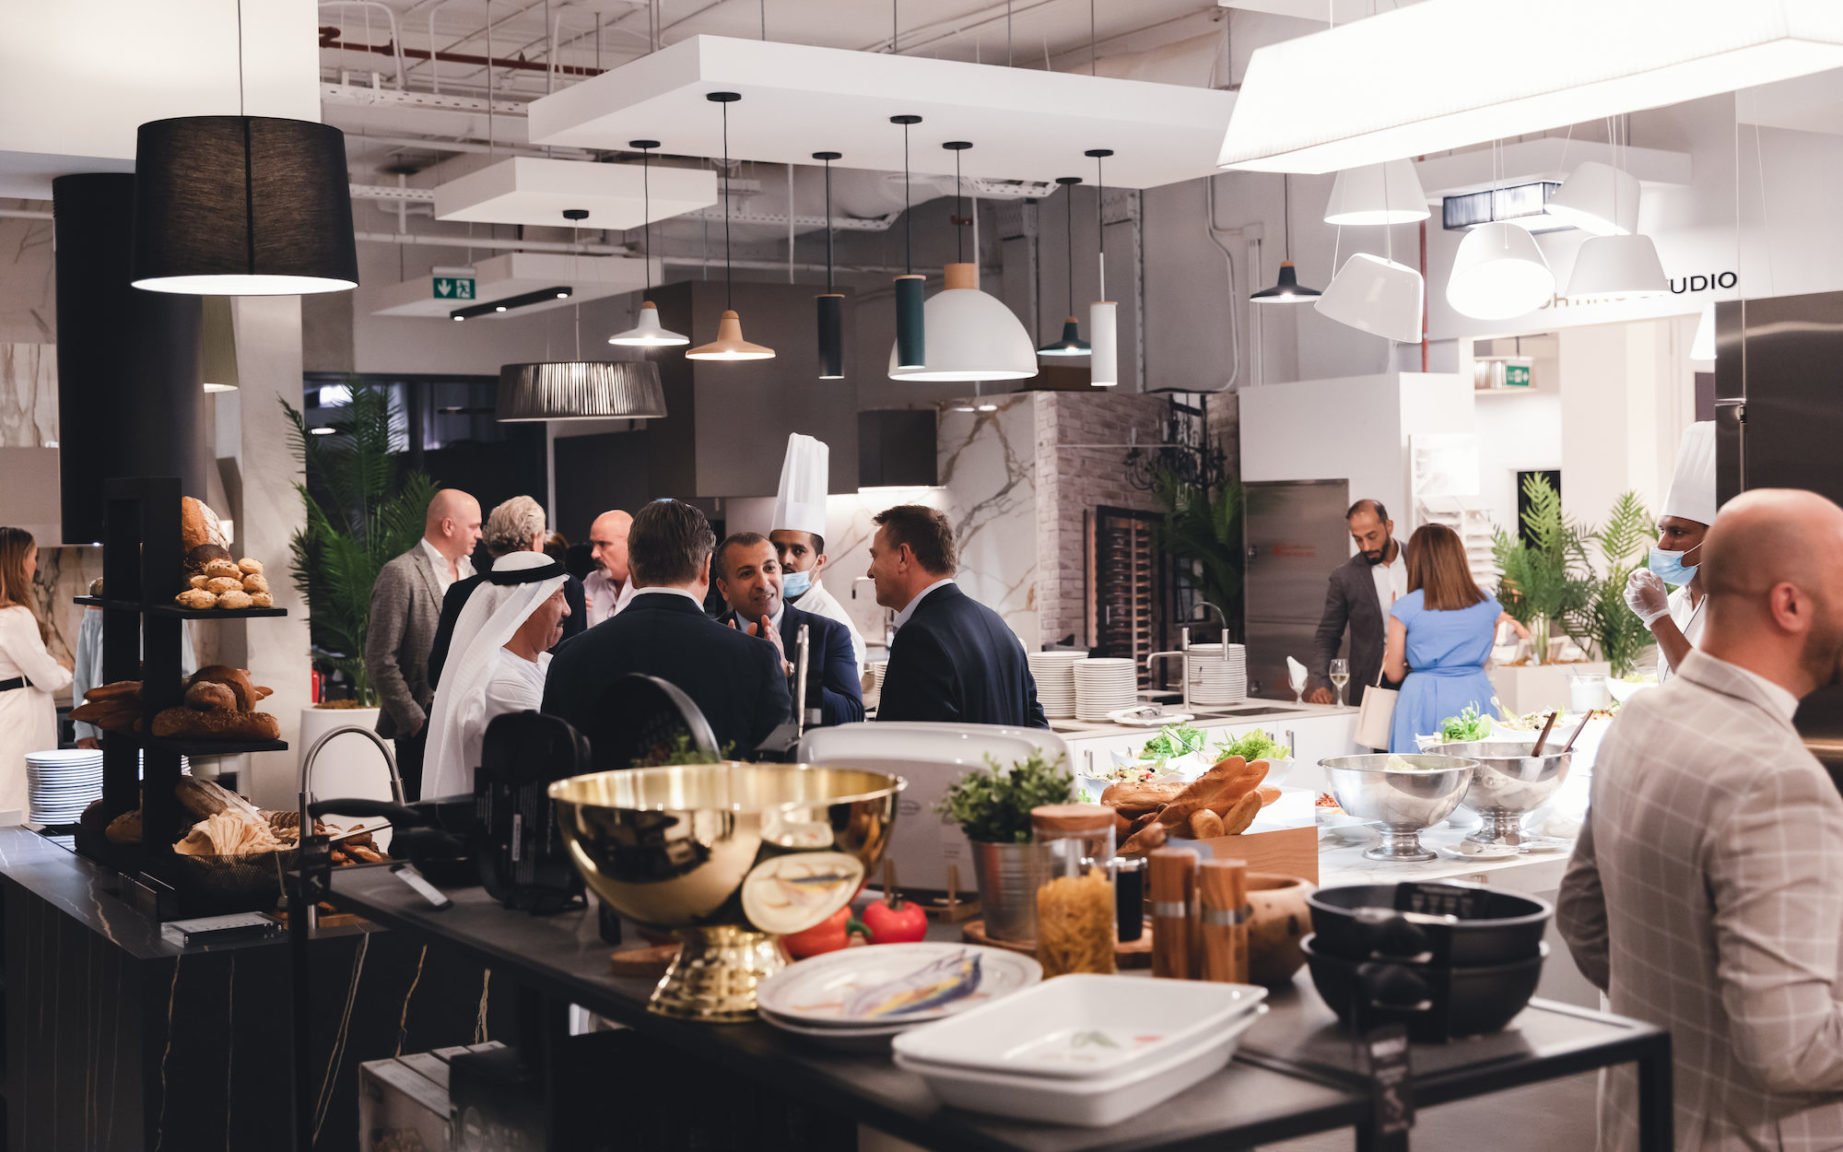 Launch Of New Kitchen and Lighting Collections By SANIPEXGROUP Delivers Design-Led Inspiration to A&D Professionals in Dubai